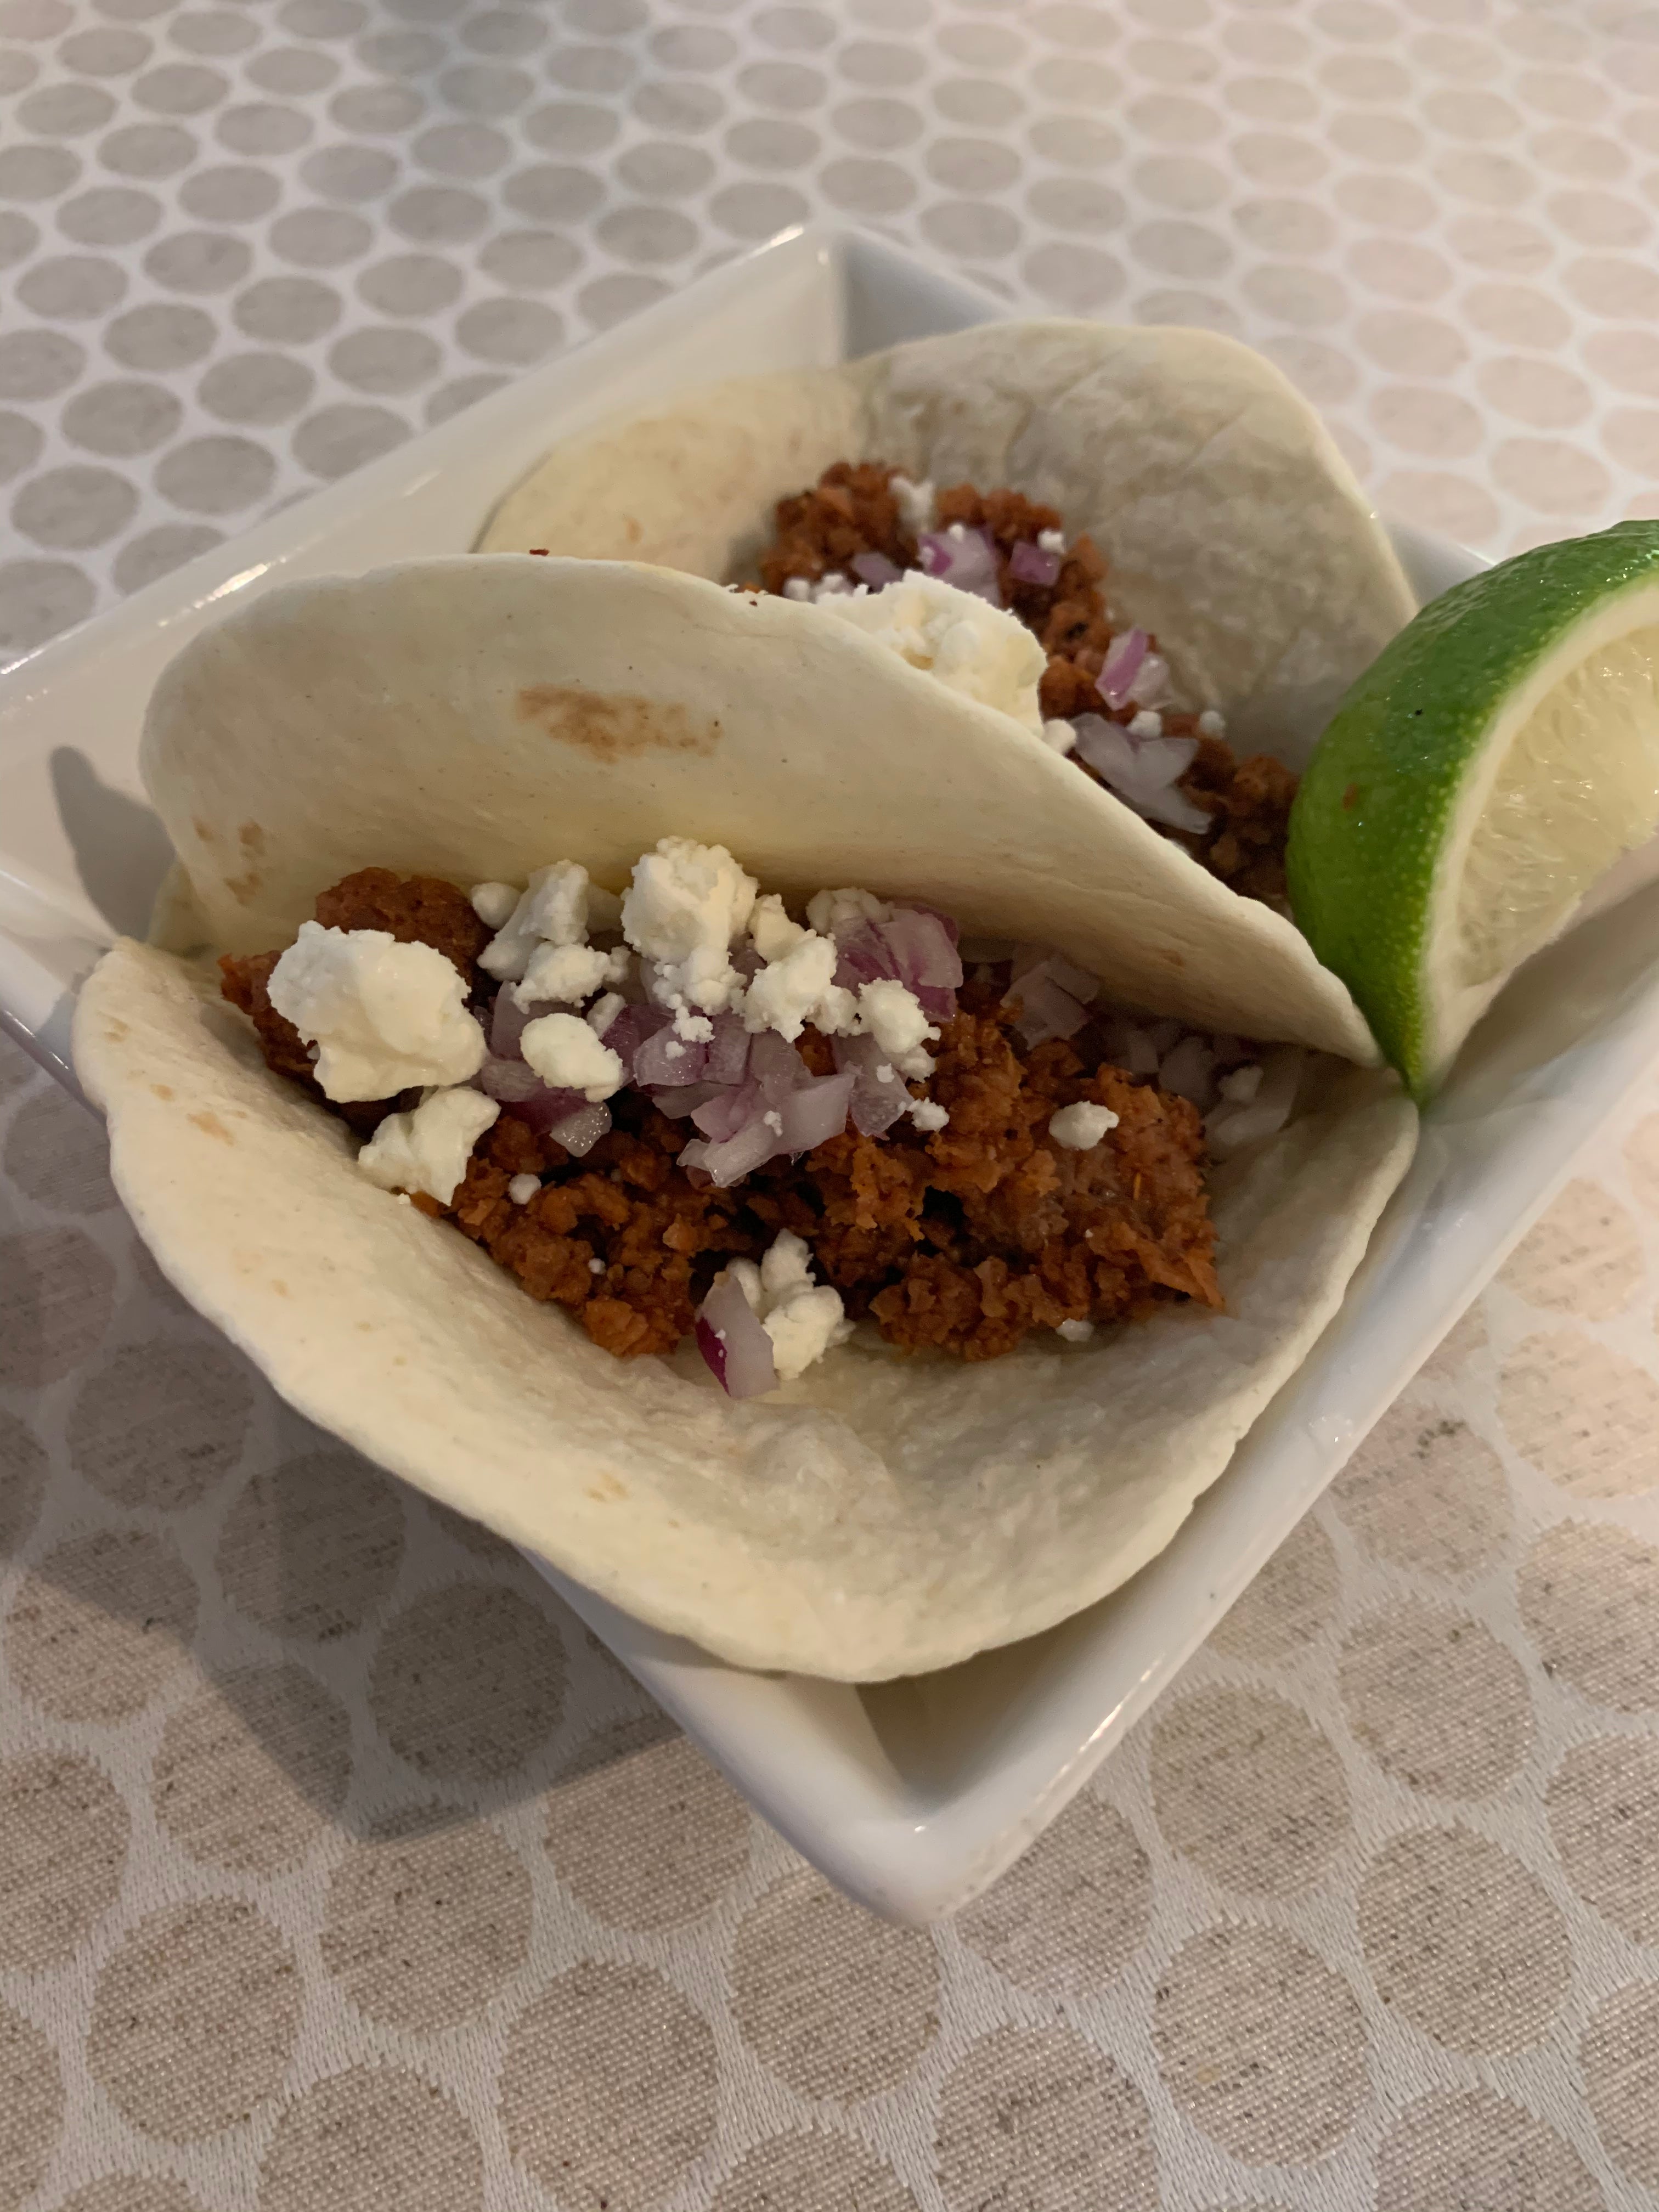 Vegan street tacos in a square white dish